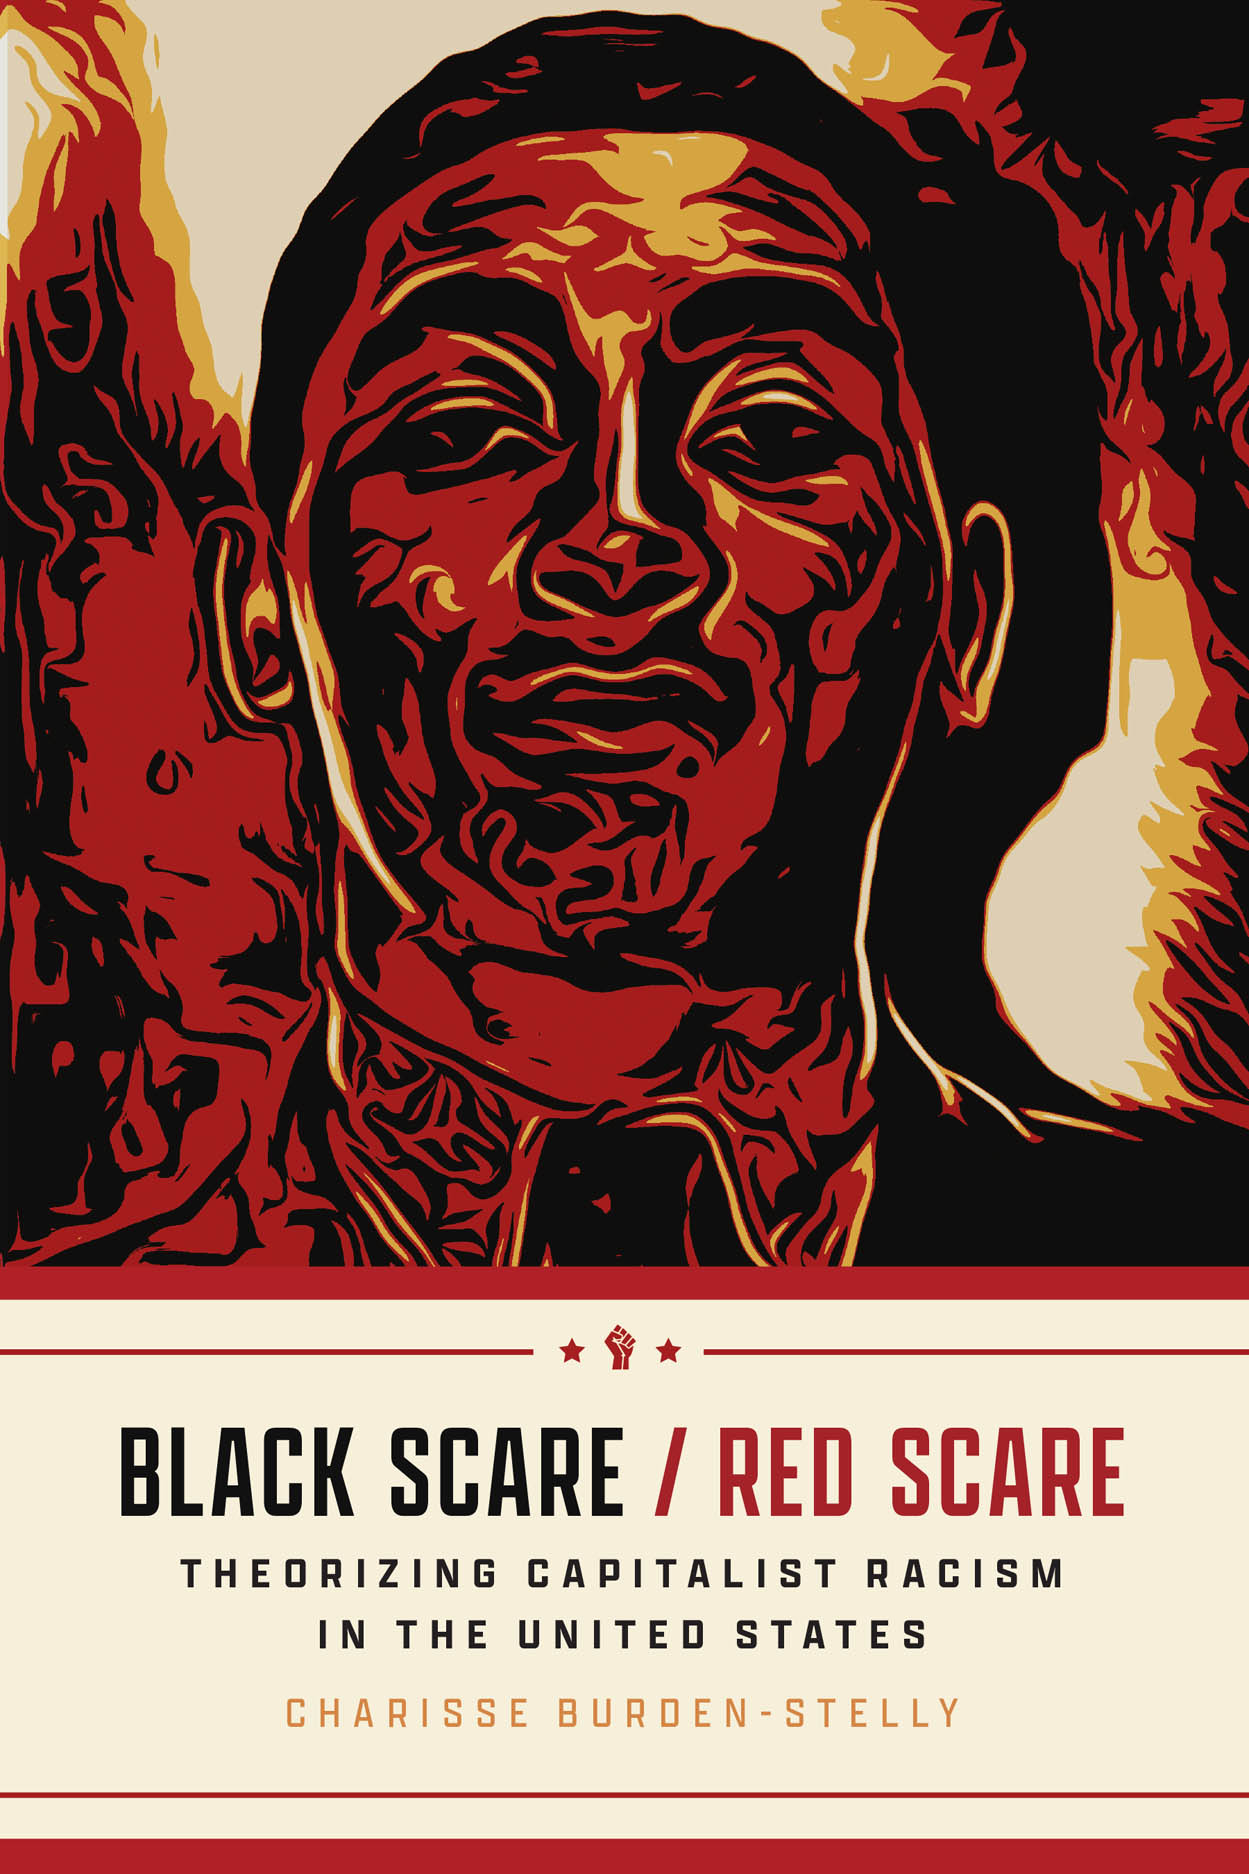 Red scare